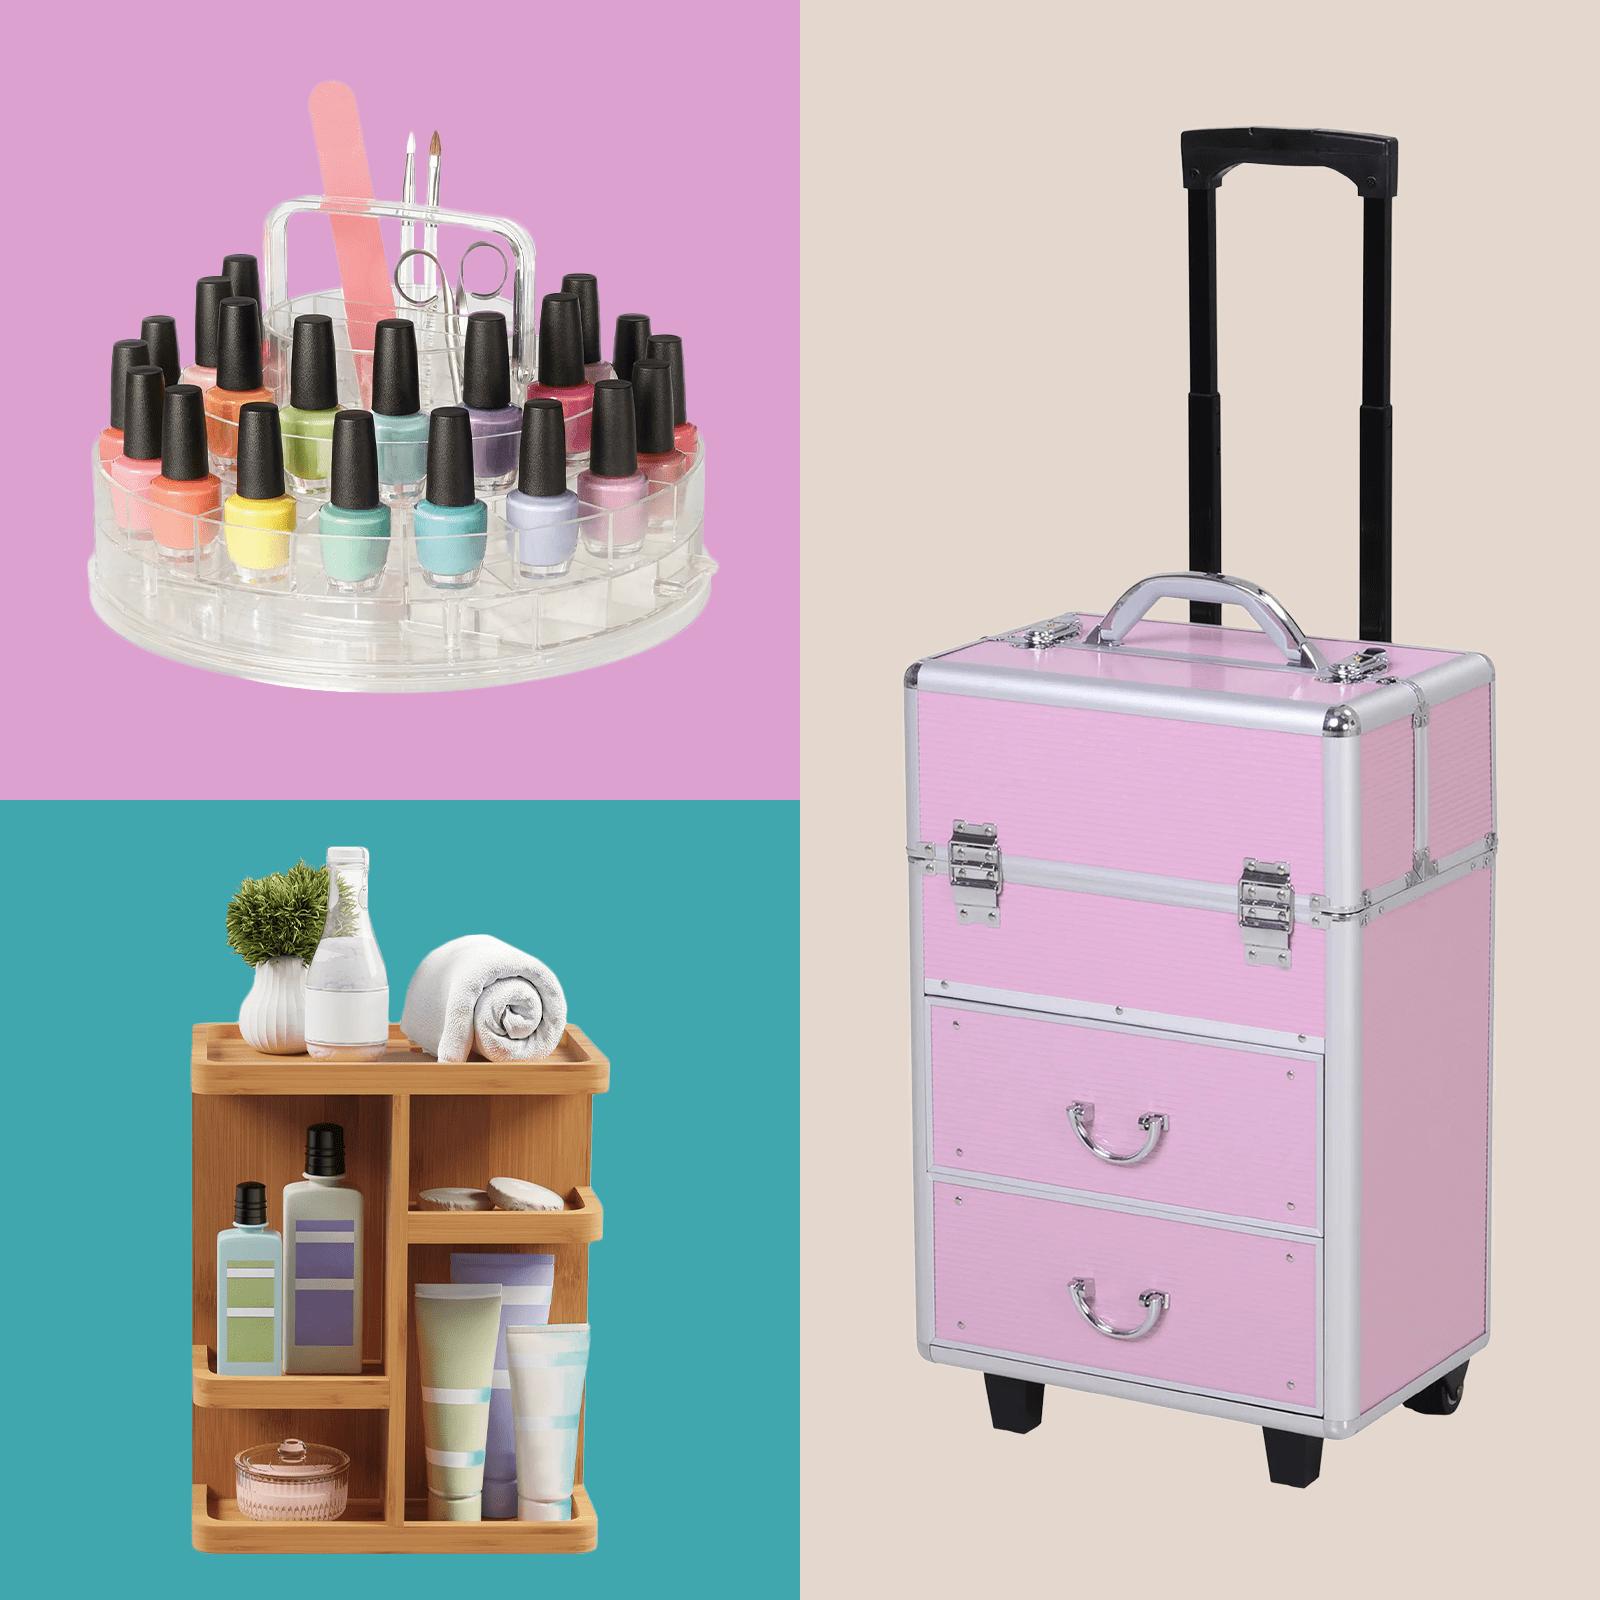 https://www.rd.com/wp-content/uploads/2022/05/15-best-makeup-organizers-to-declutter-any-space-ecomm-ft-via-merchant.png